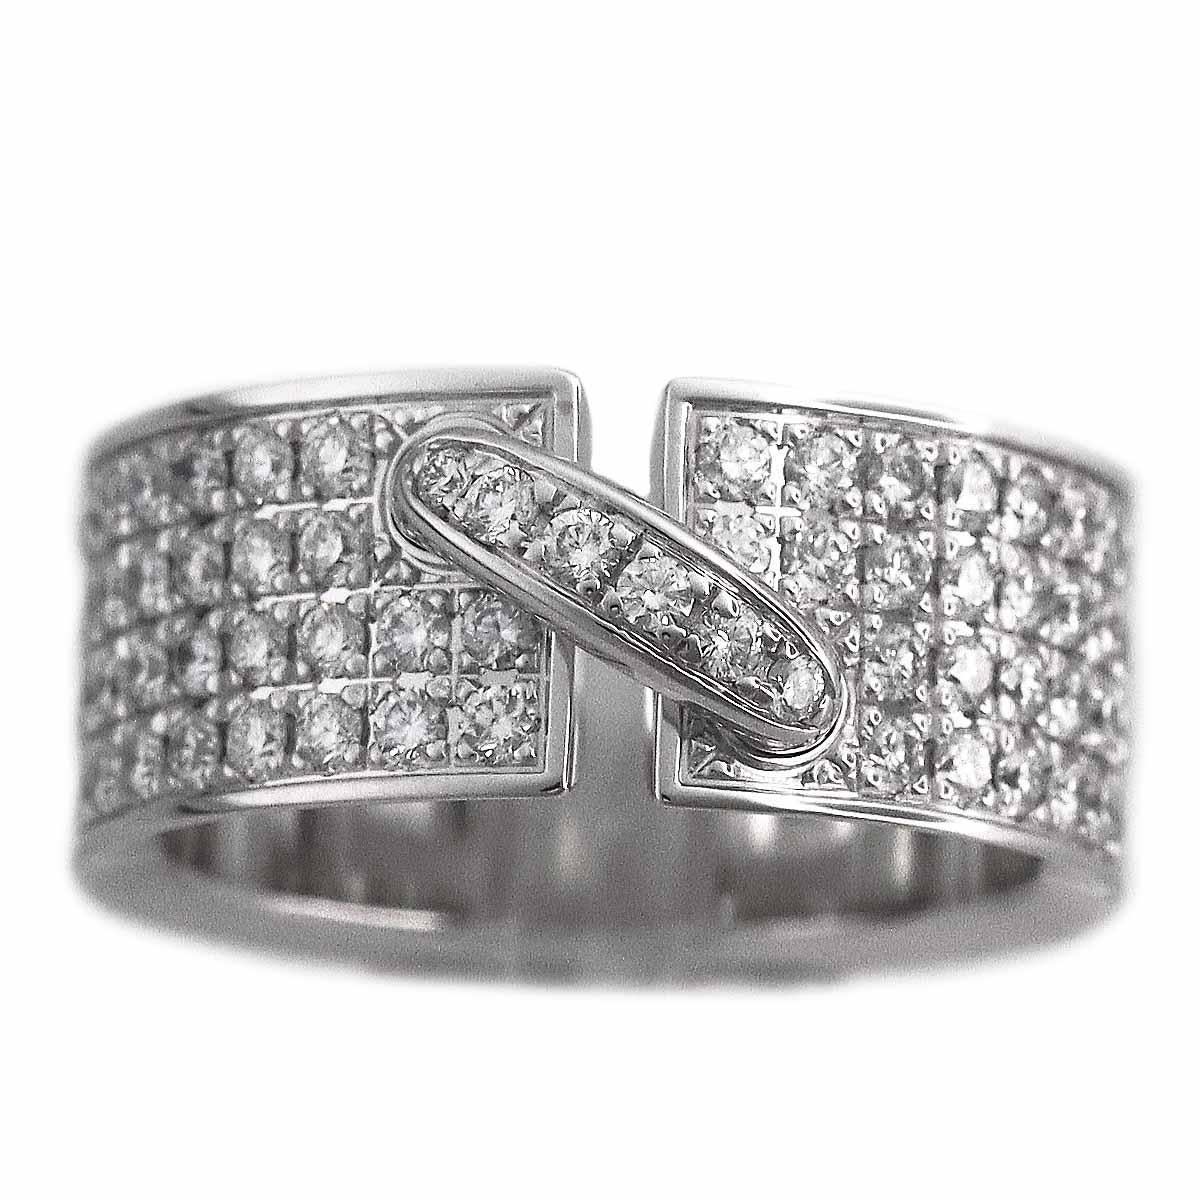 Brand:CHAUMET
Name:Liens Ring
Material:Diamond, 750 K18 WG white gold
Weight:9.8g（Approx)
Ring size(inch):British & Australian:K 1/2  /   US & Canada:5 1/2 /  French & Russian:50 /  German:15.9 /  Japanese:  10 /Swiss: